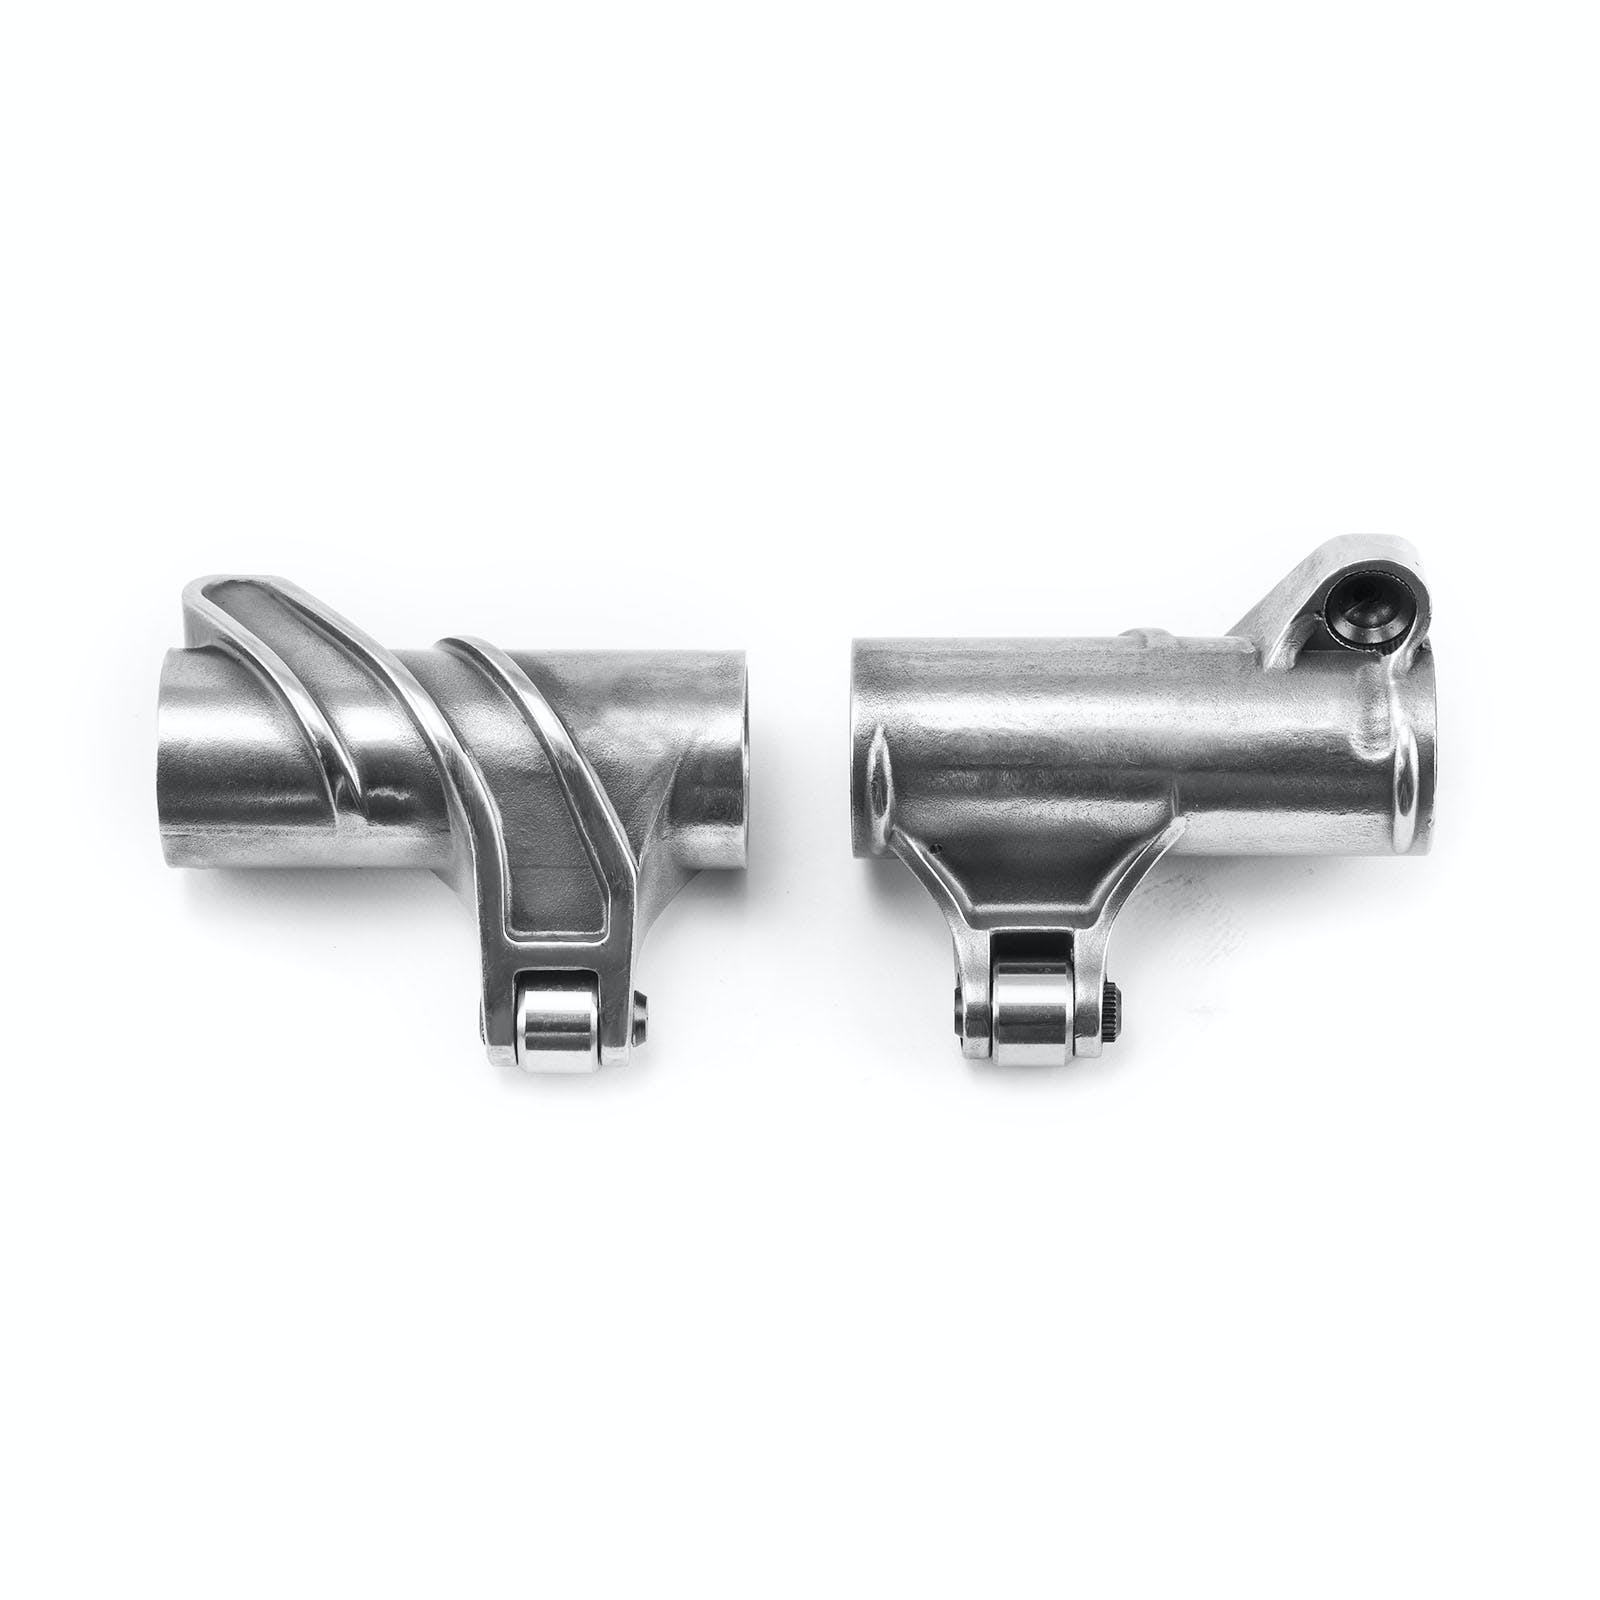 Speedmaster PCE261.1247 Stainless Steel Roller Rocker Arms and Shafts